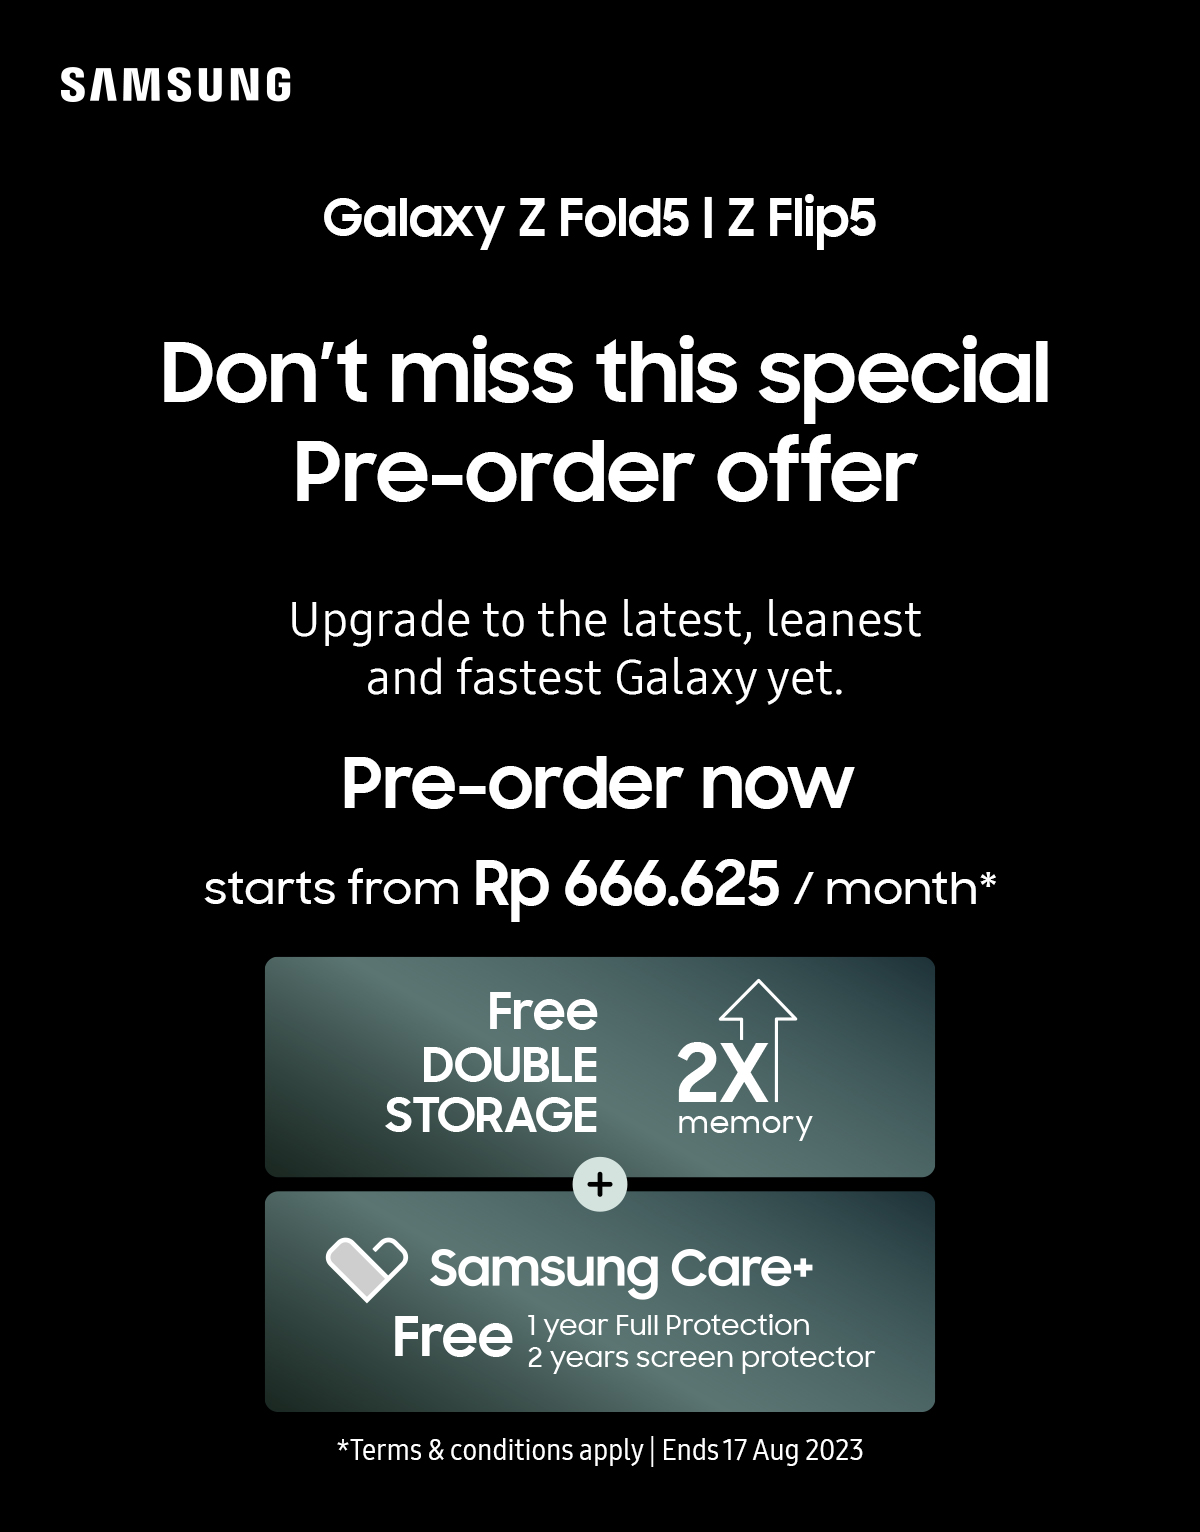 Galaxy Z Fold5| Z Flip5. Don't miss this special offer! 